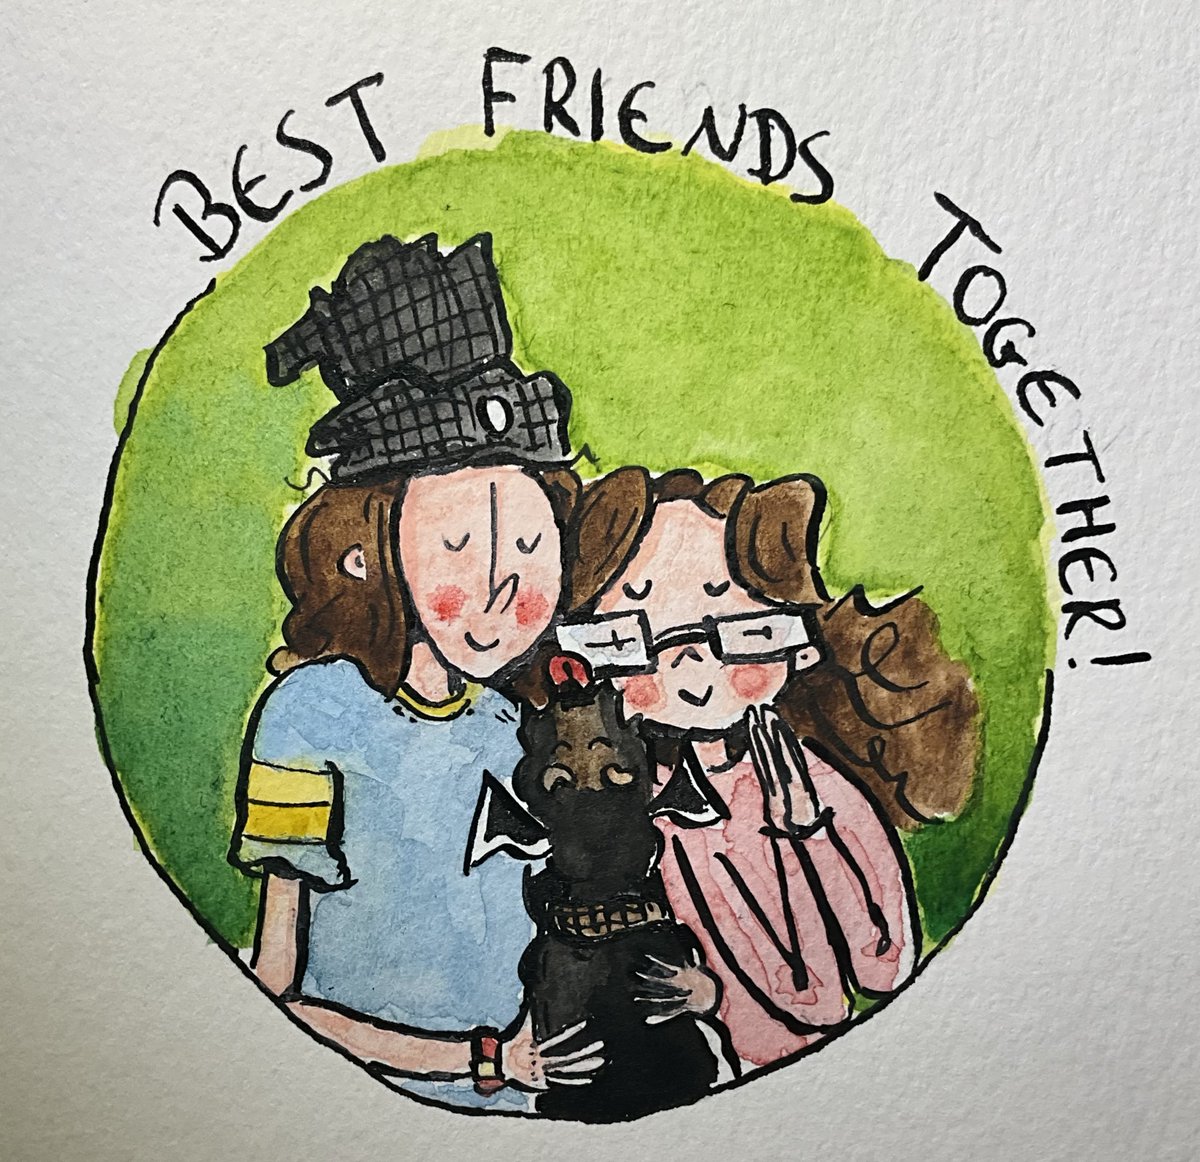 Nice to see them all getting on! #doodleaday #draweveryday #dog #adogslife #watercolor #petdog #Familylove #familybonding #sisters #sisterlove #SistersLove #sisterhood #watercolourdaily #familyhug #draw #drawings #doodles #doodling #painteveryday #daughters #art #doodle #family